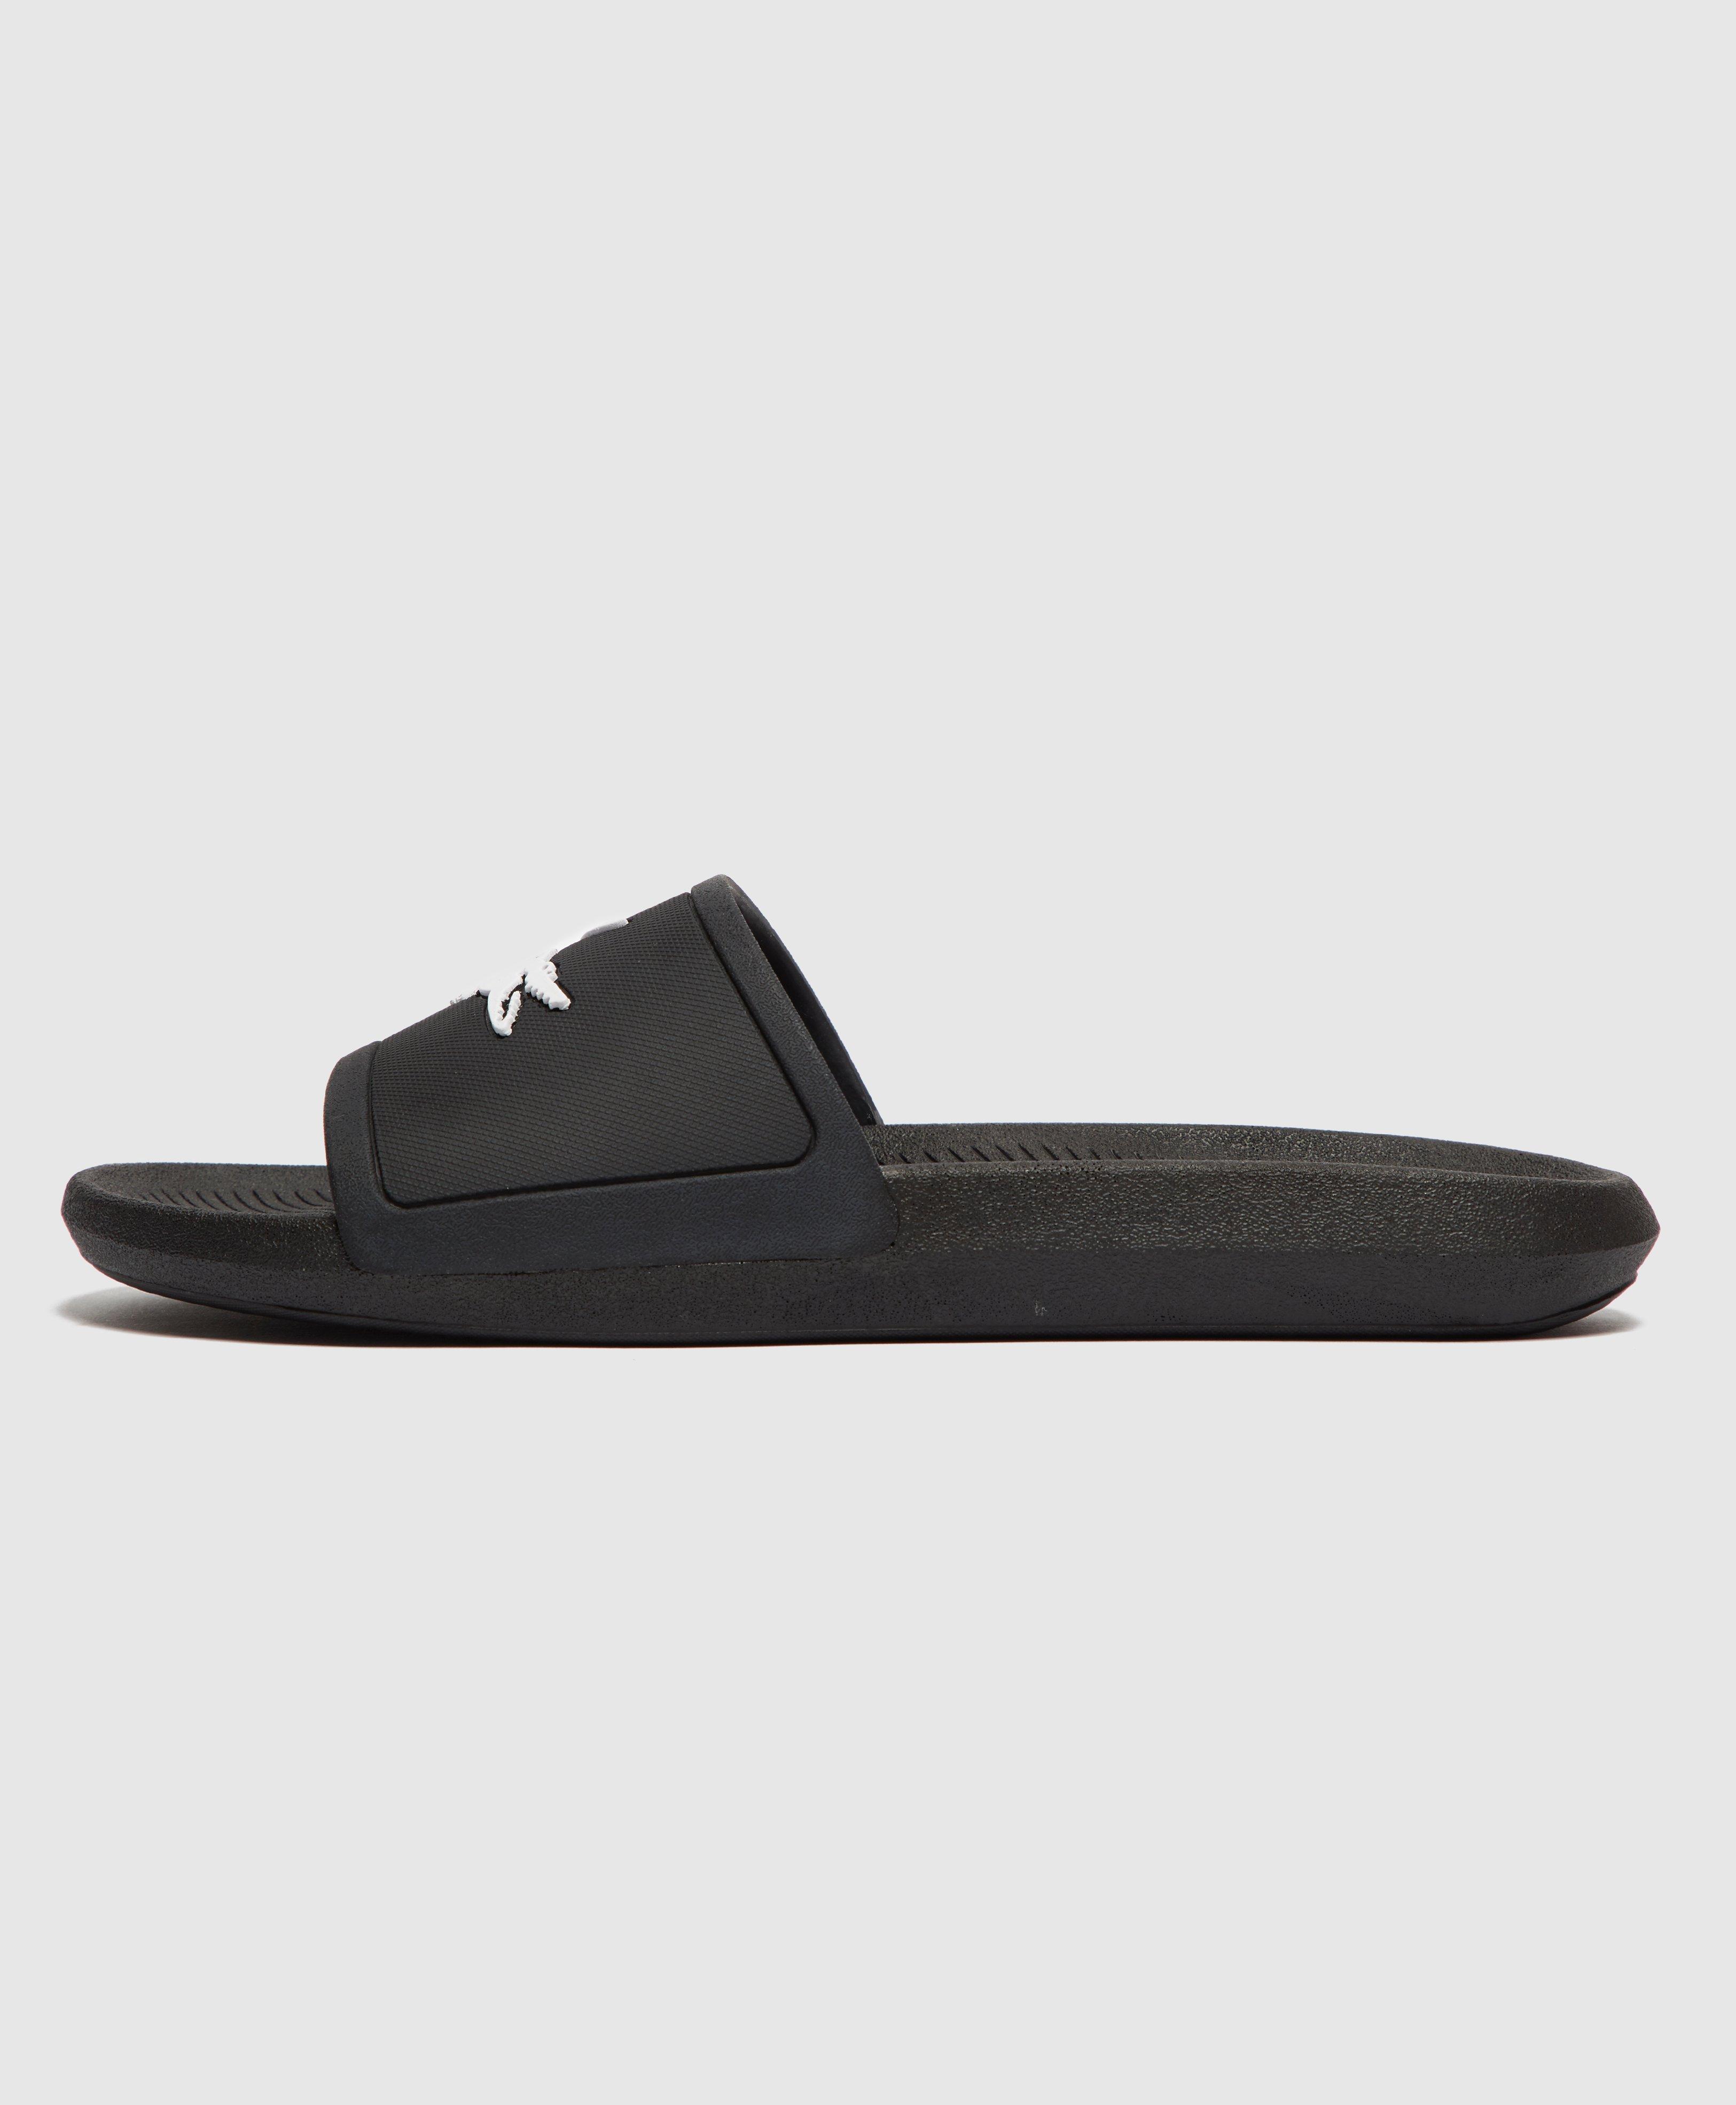 Lacoste Synthetic Croco Slides in Black for Men - Lyst